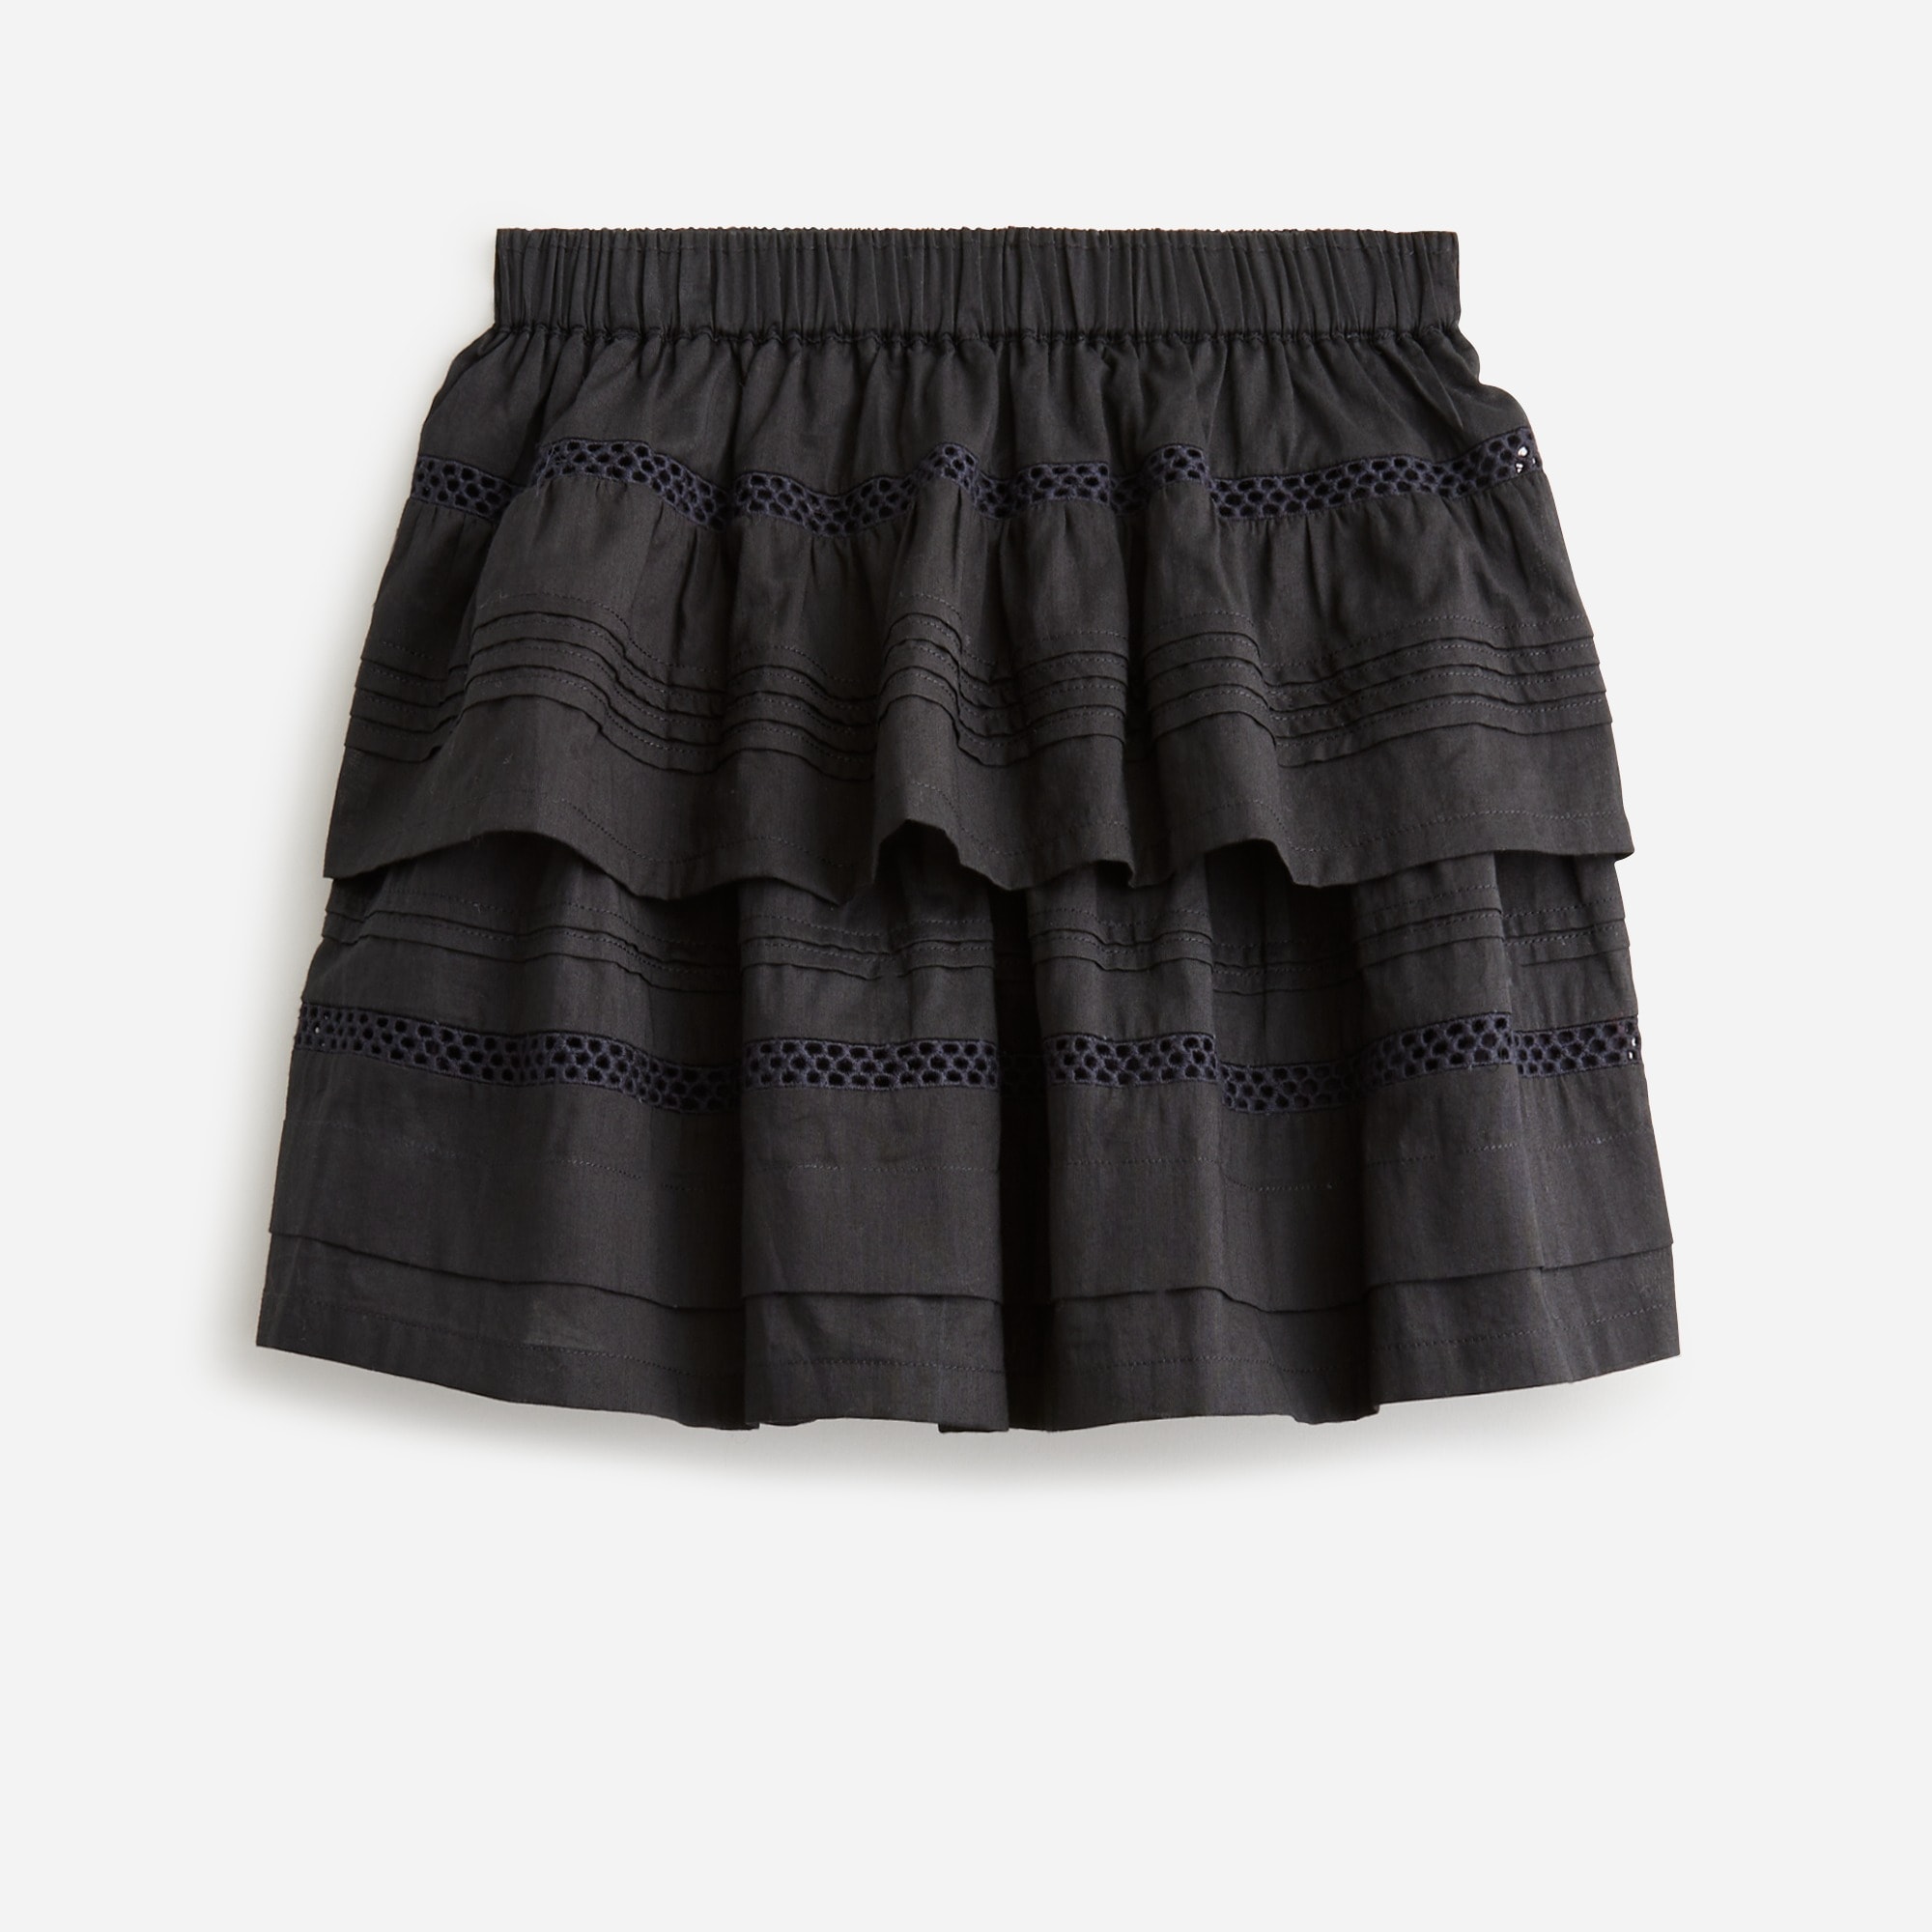  Girls' eyelet tiered skirt in cotton voile